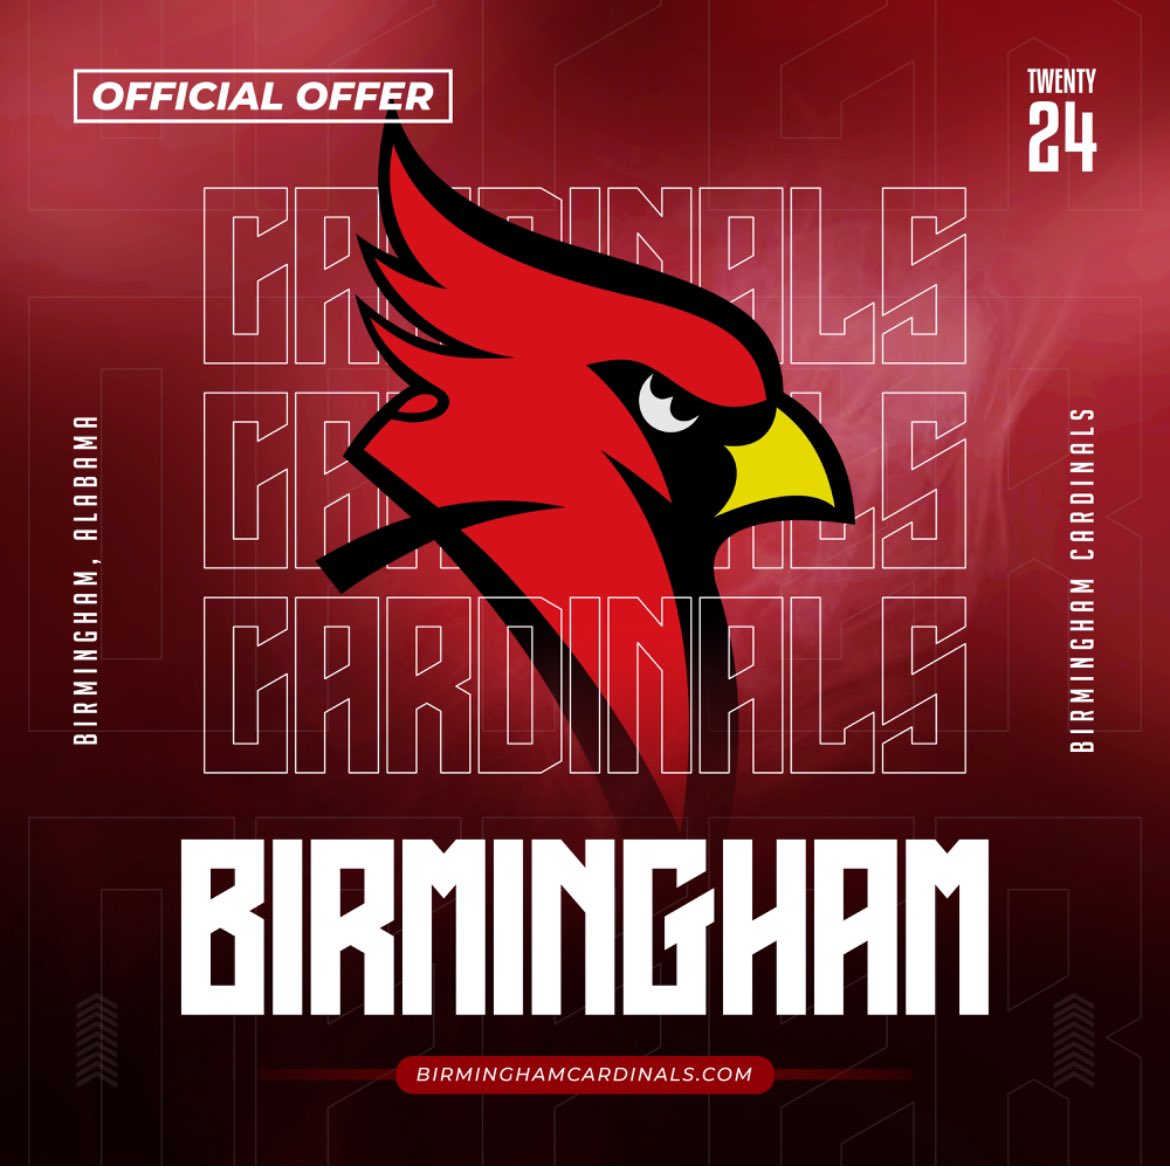 Blessed to receive an offer from @BirminghamCards after a great conversation with @coachhalwalker 🙏🏽